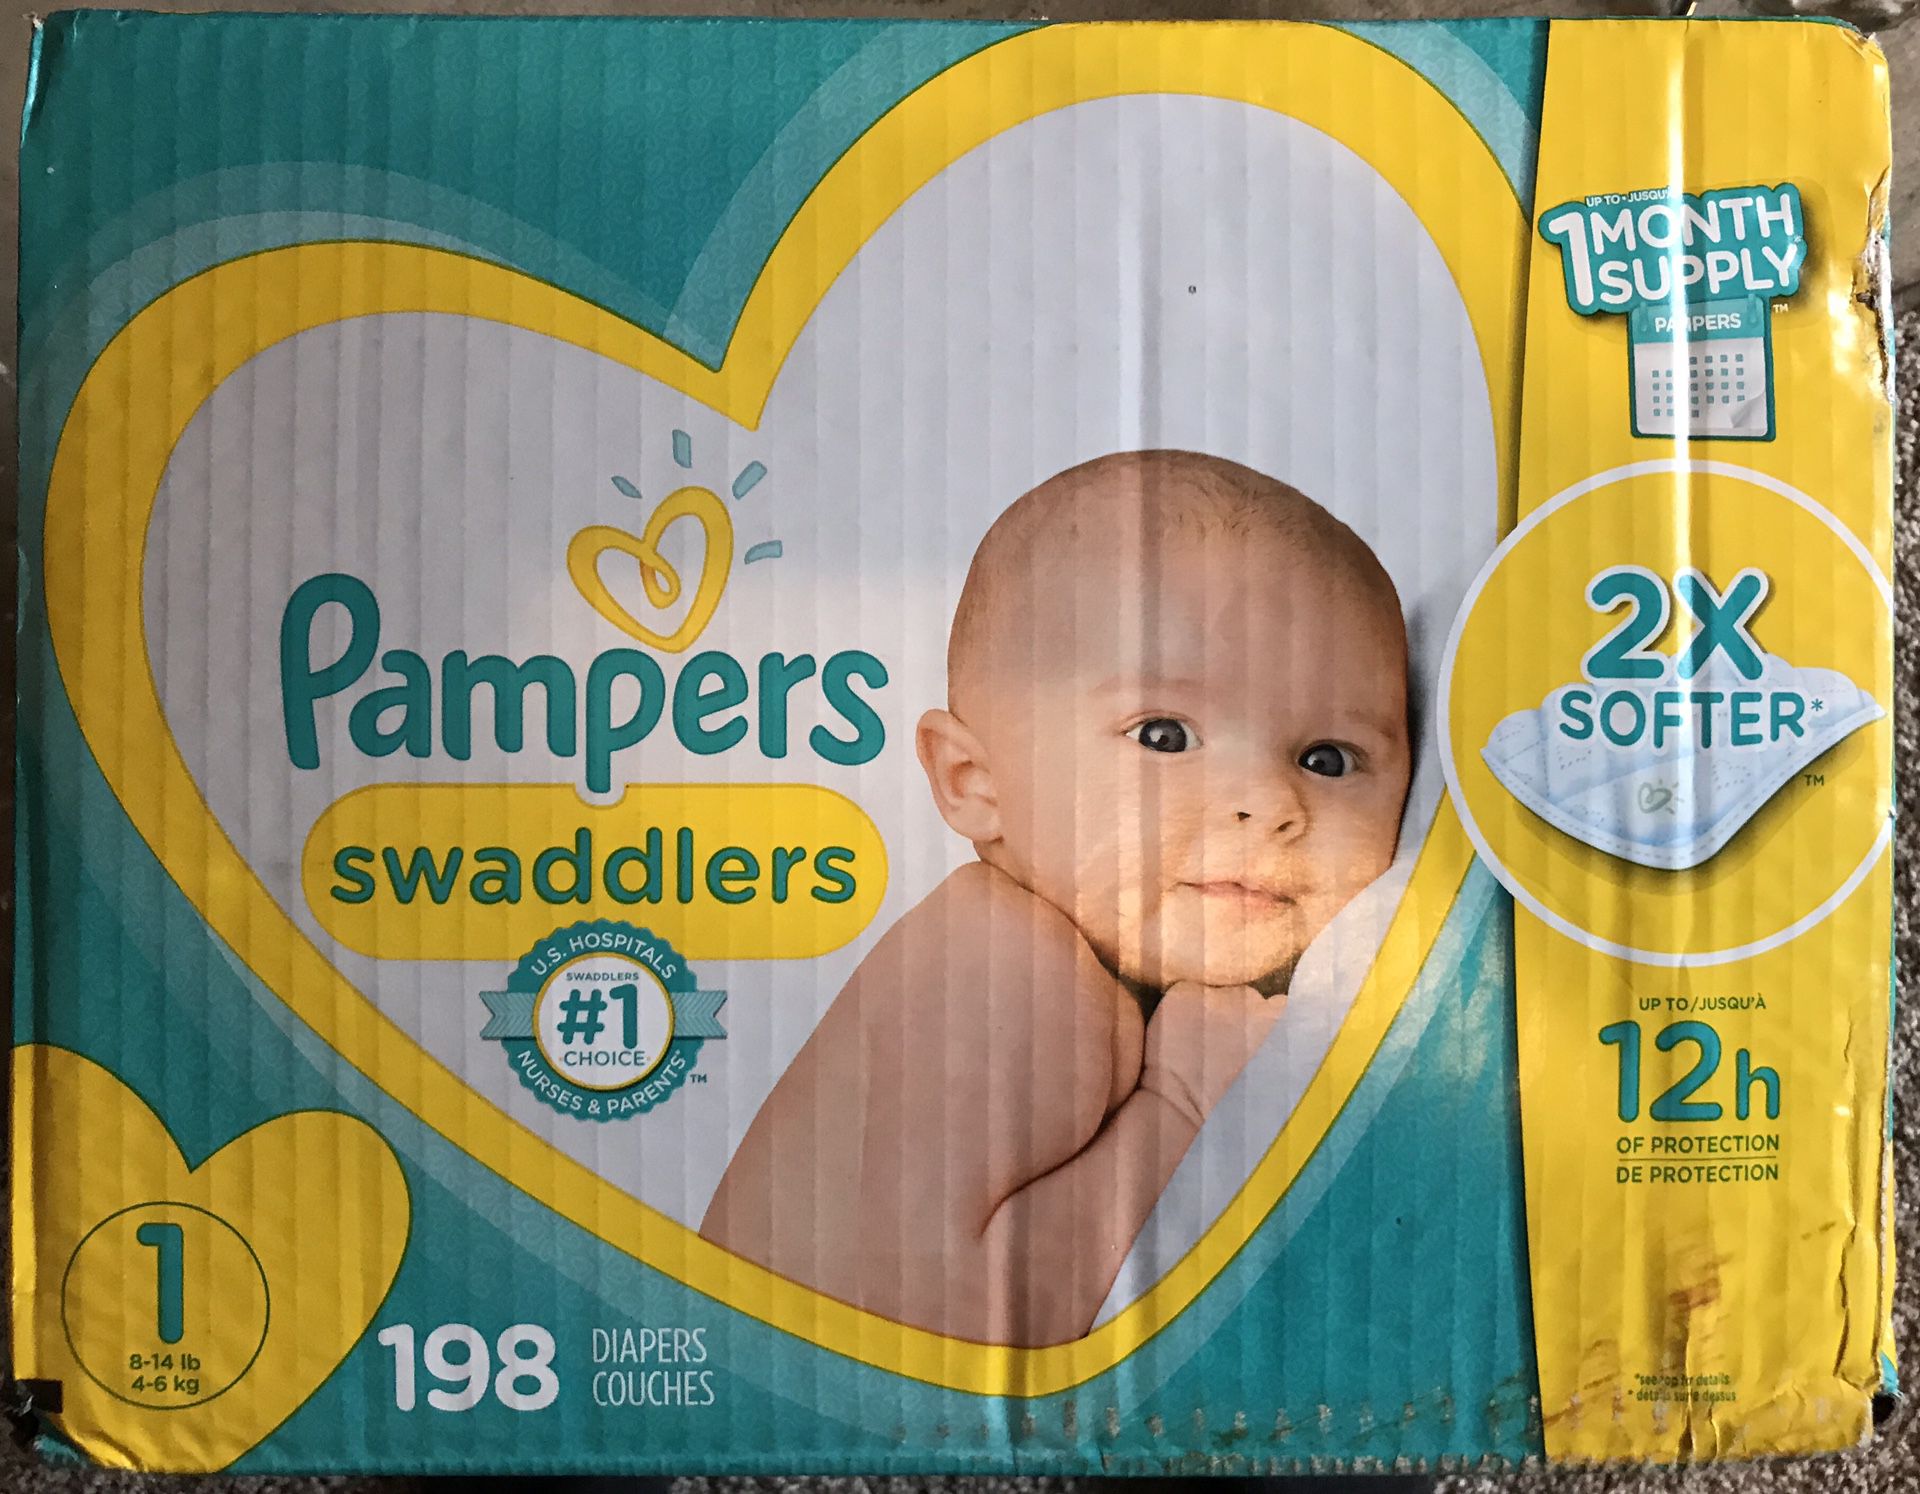 Pampers Swaddlers Size 1 - 198 count